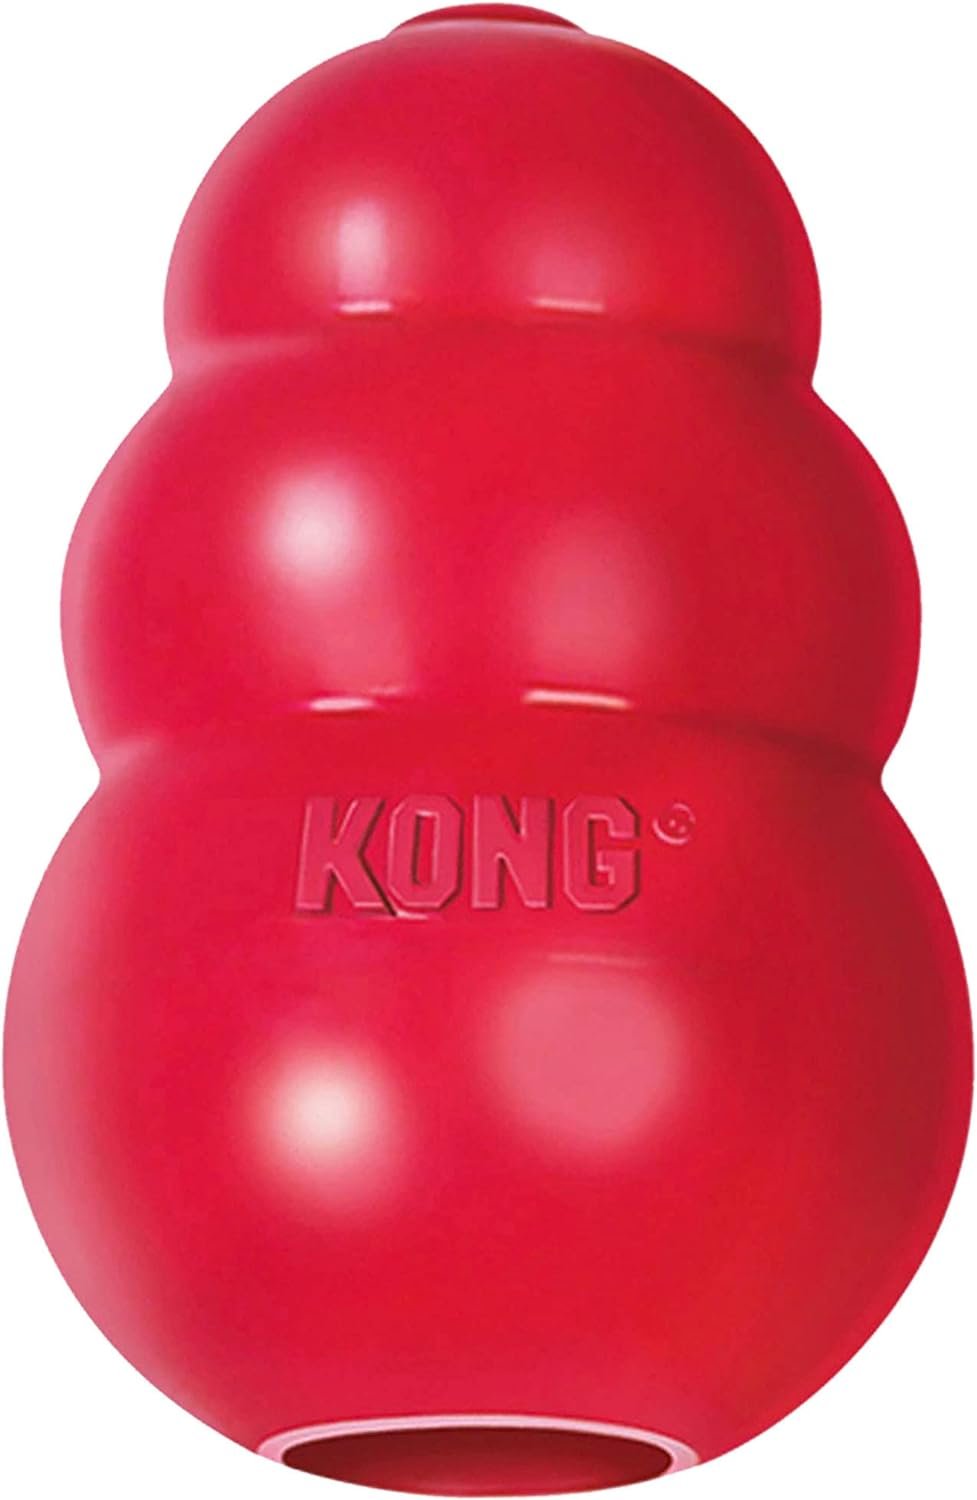 kong classic dog toy durable natural rubber fun to chew chase and fetch for medium dogs